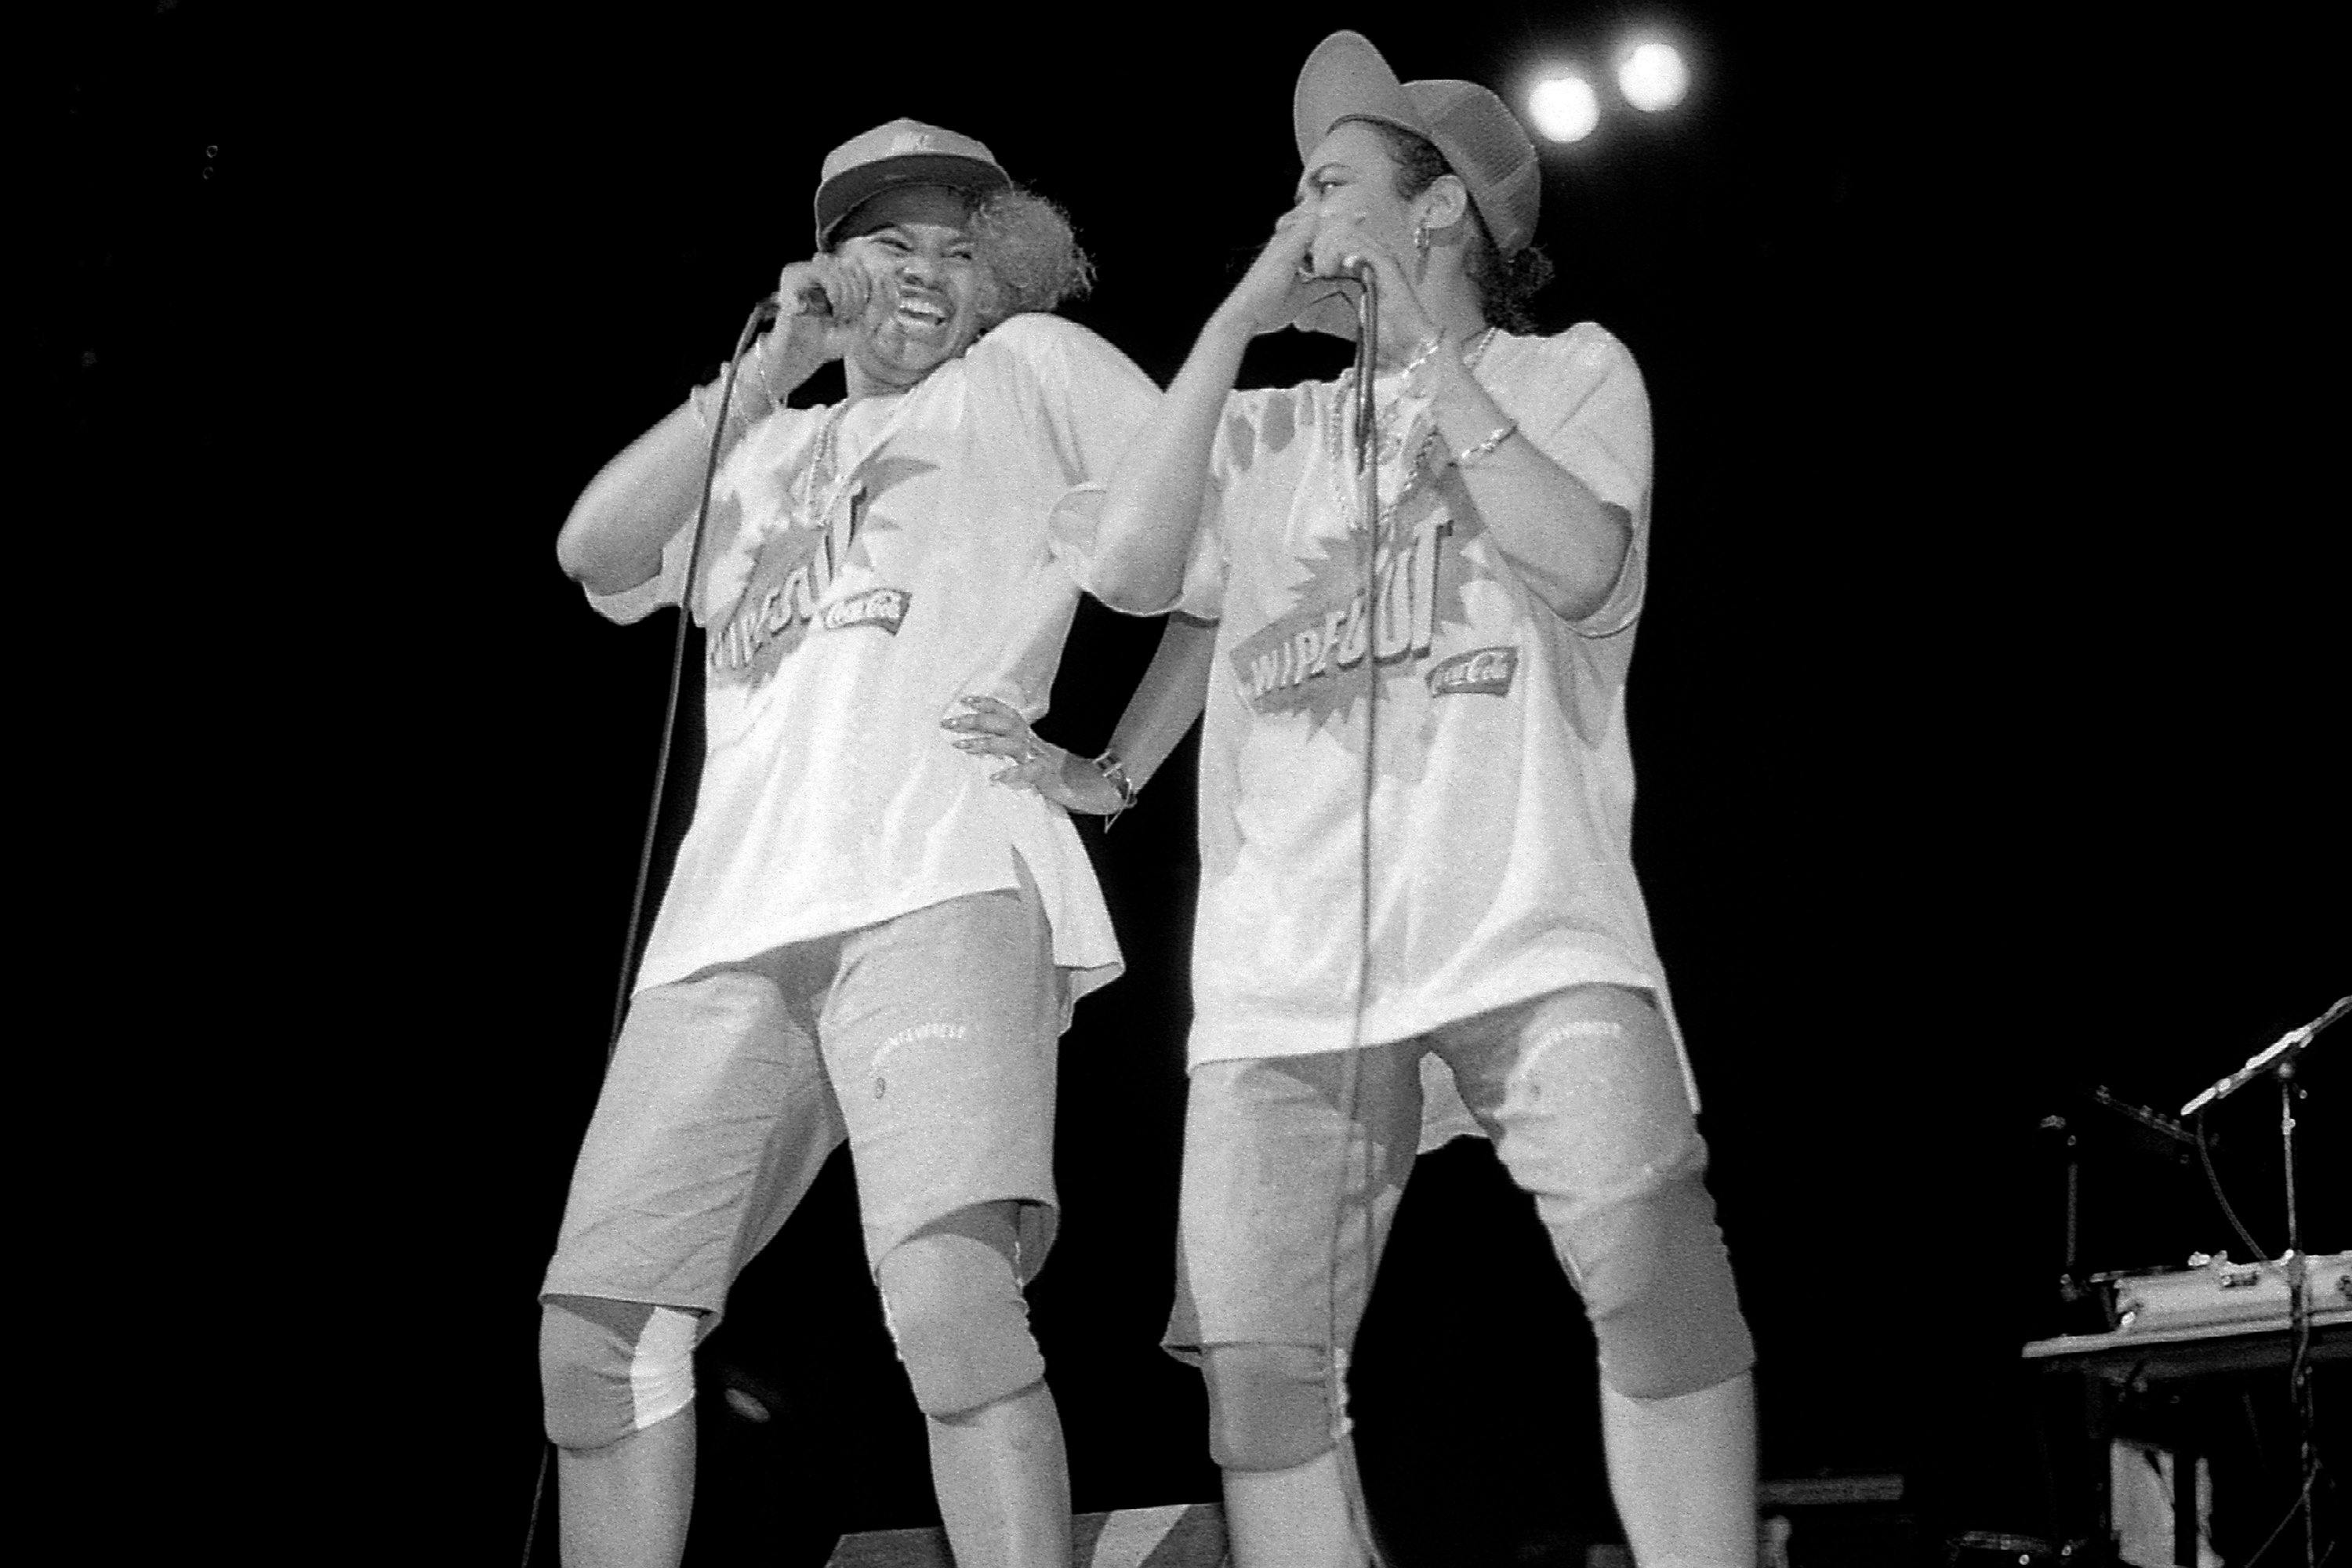 Pepa and Salt from Salt-N-Pepa perform at the Holiday Star Theatre in Merrillville,
Indiana 1987